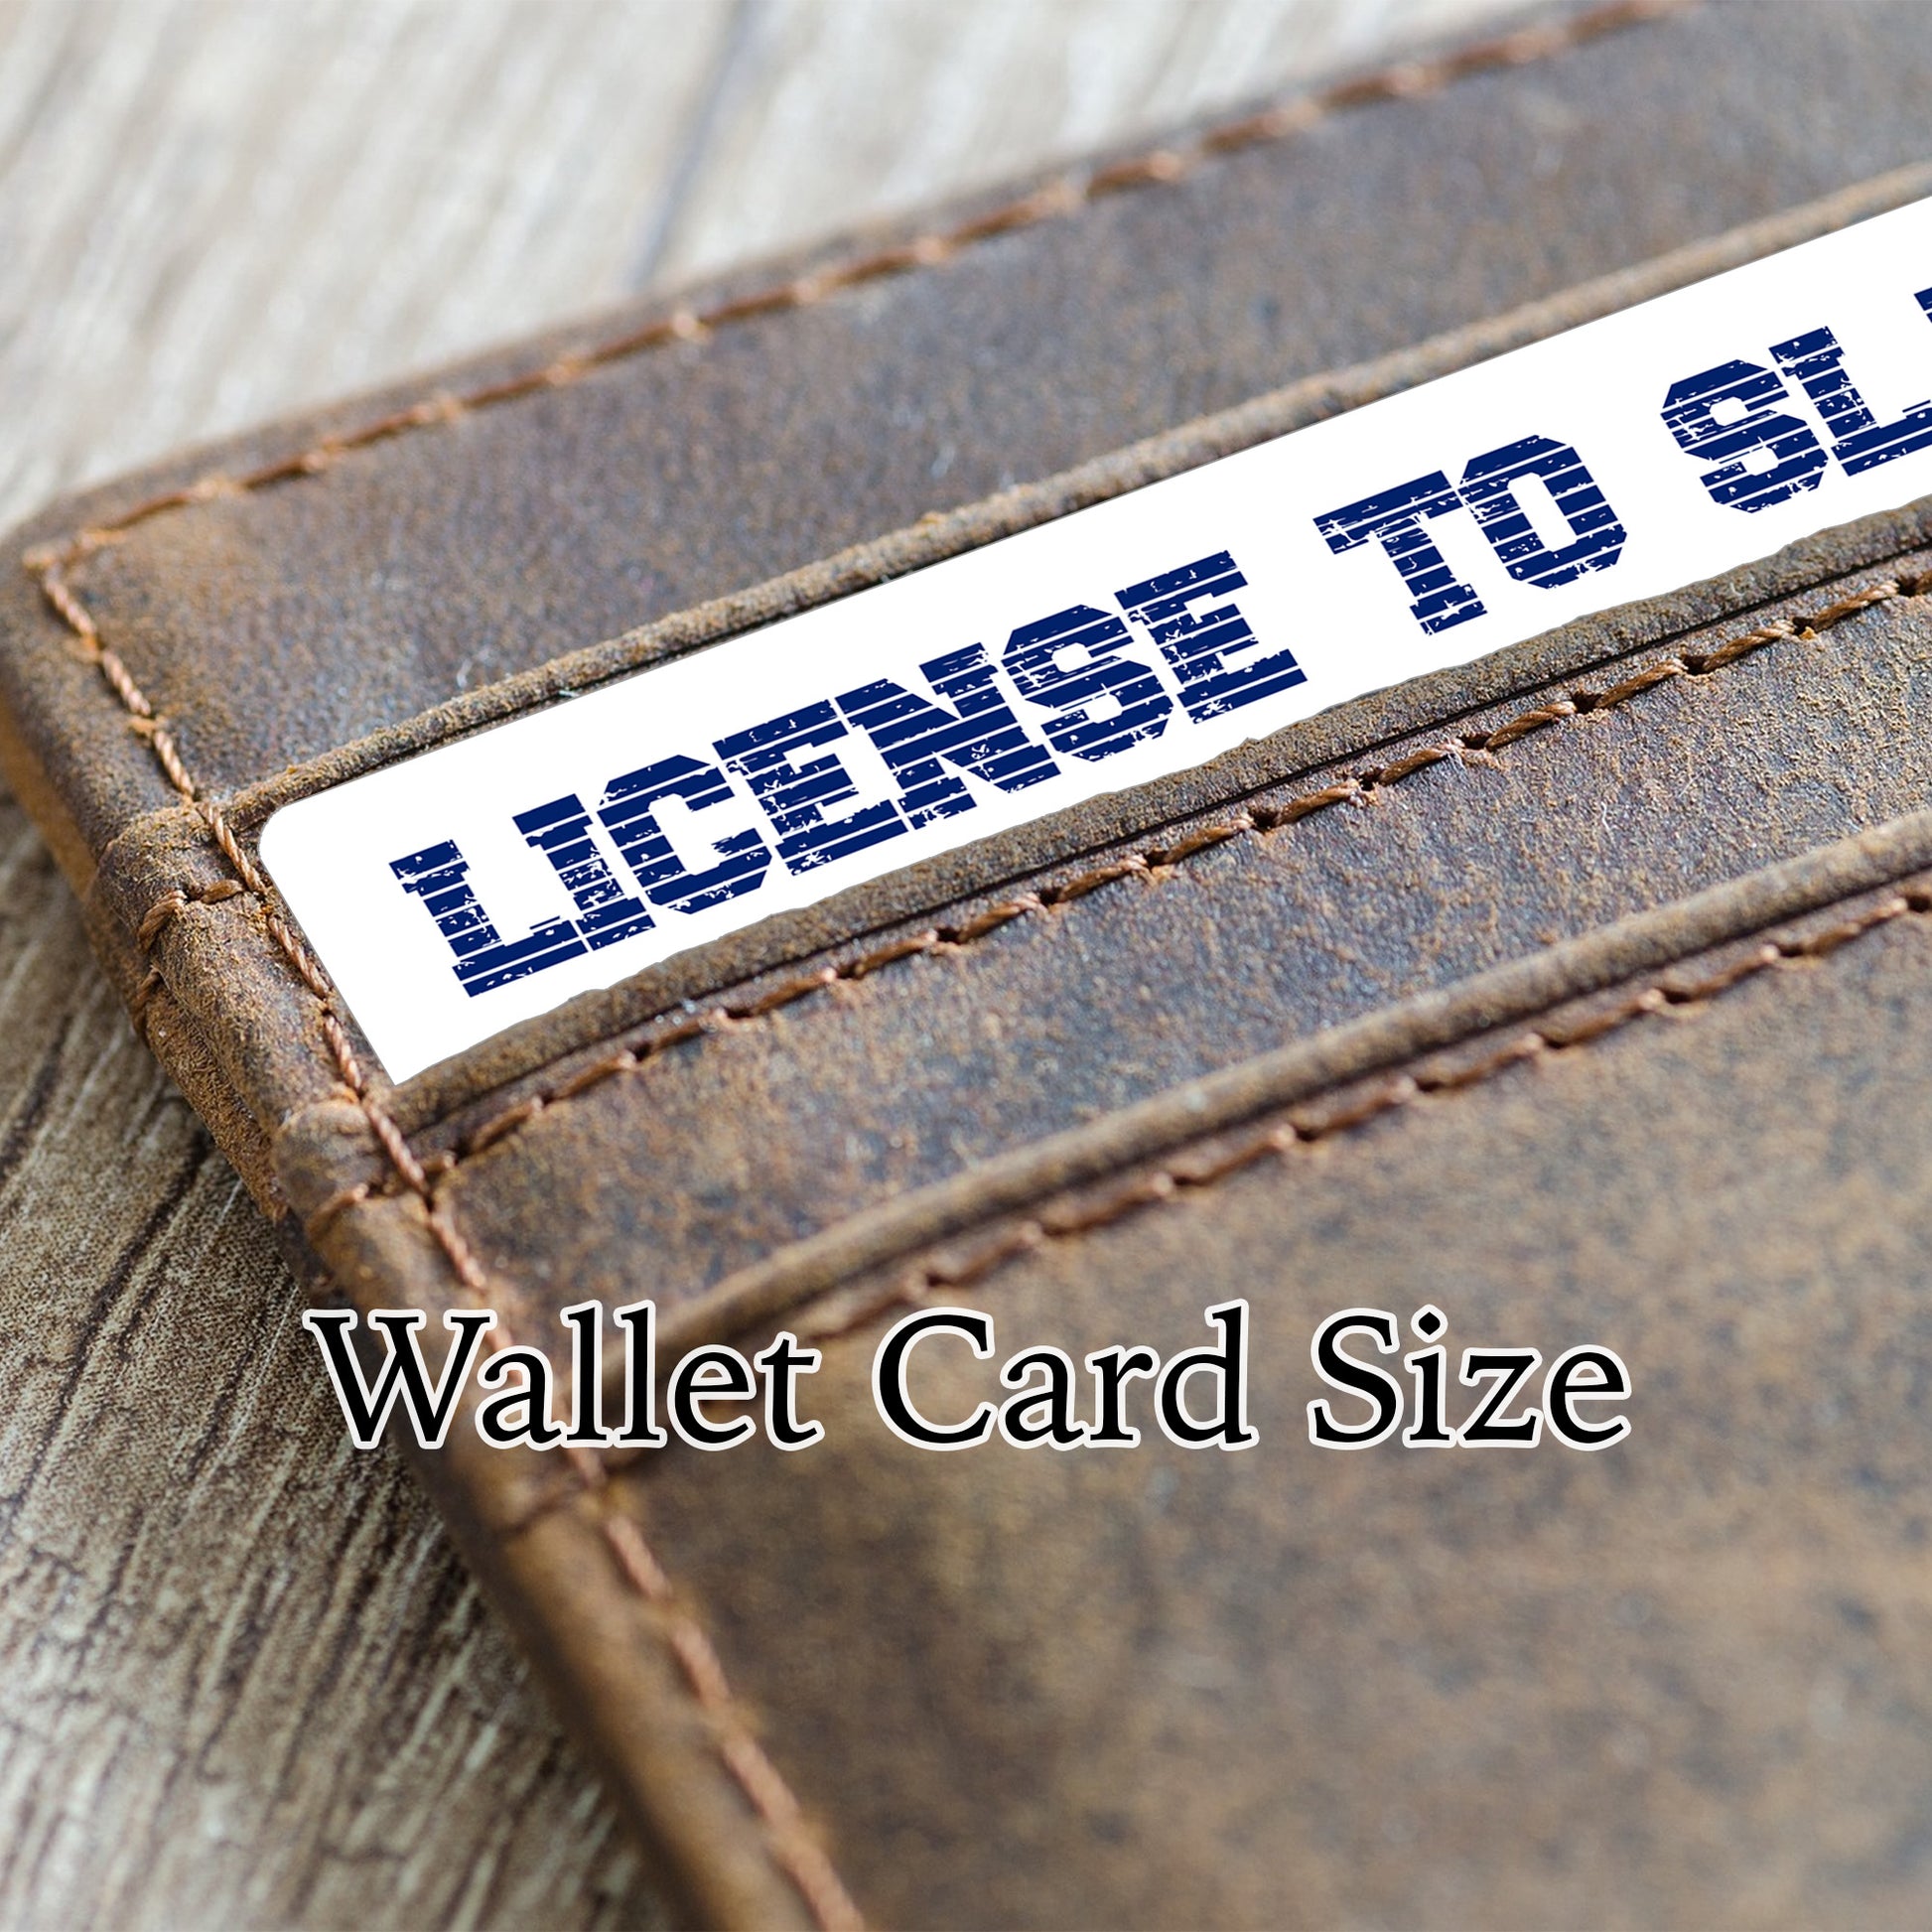 Demiromantic pride personalised license to slay card